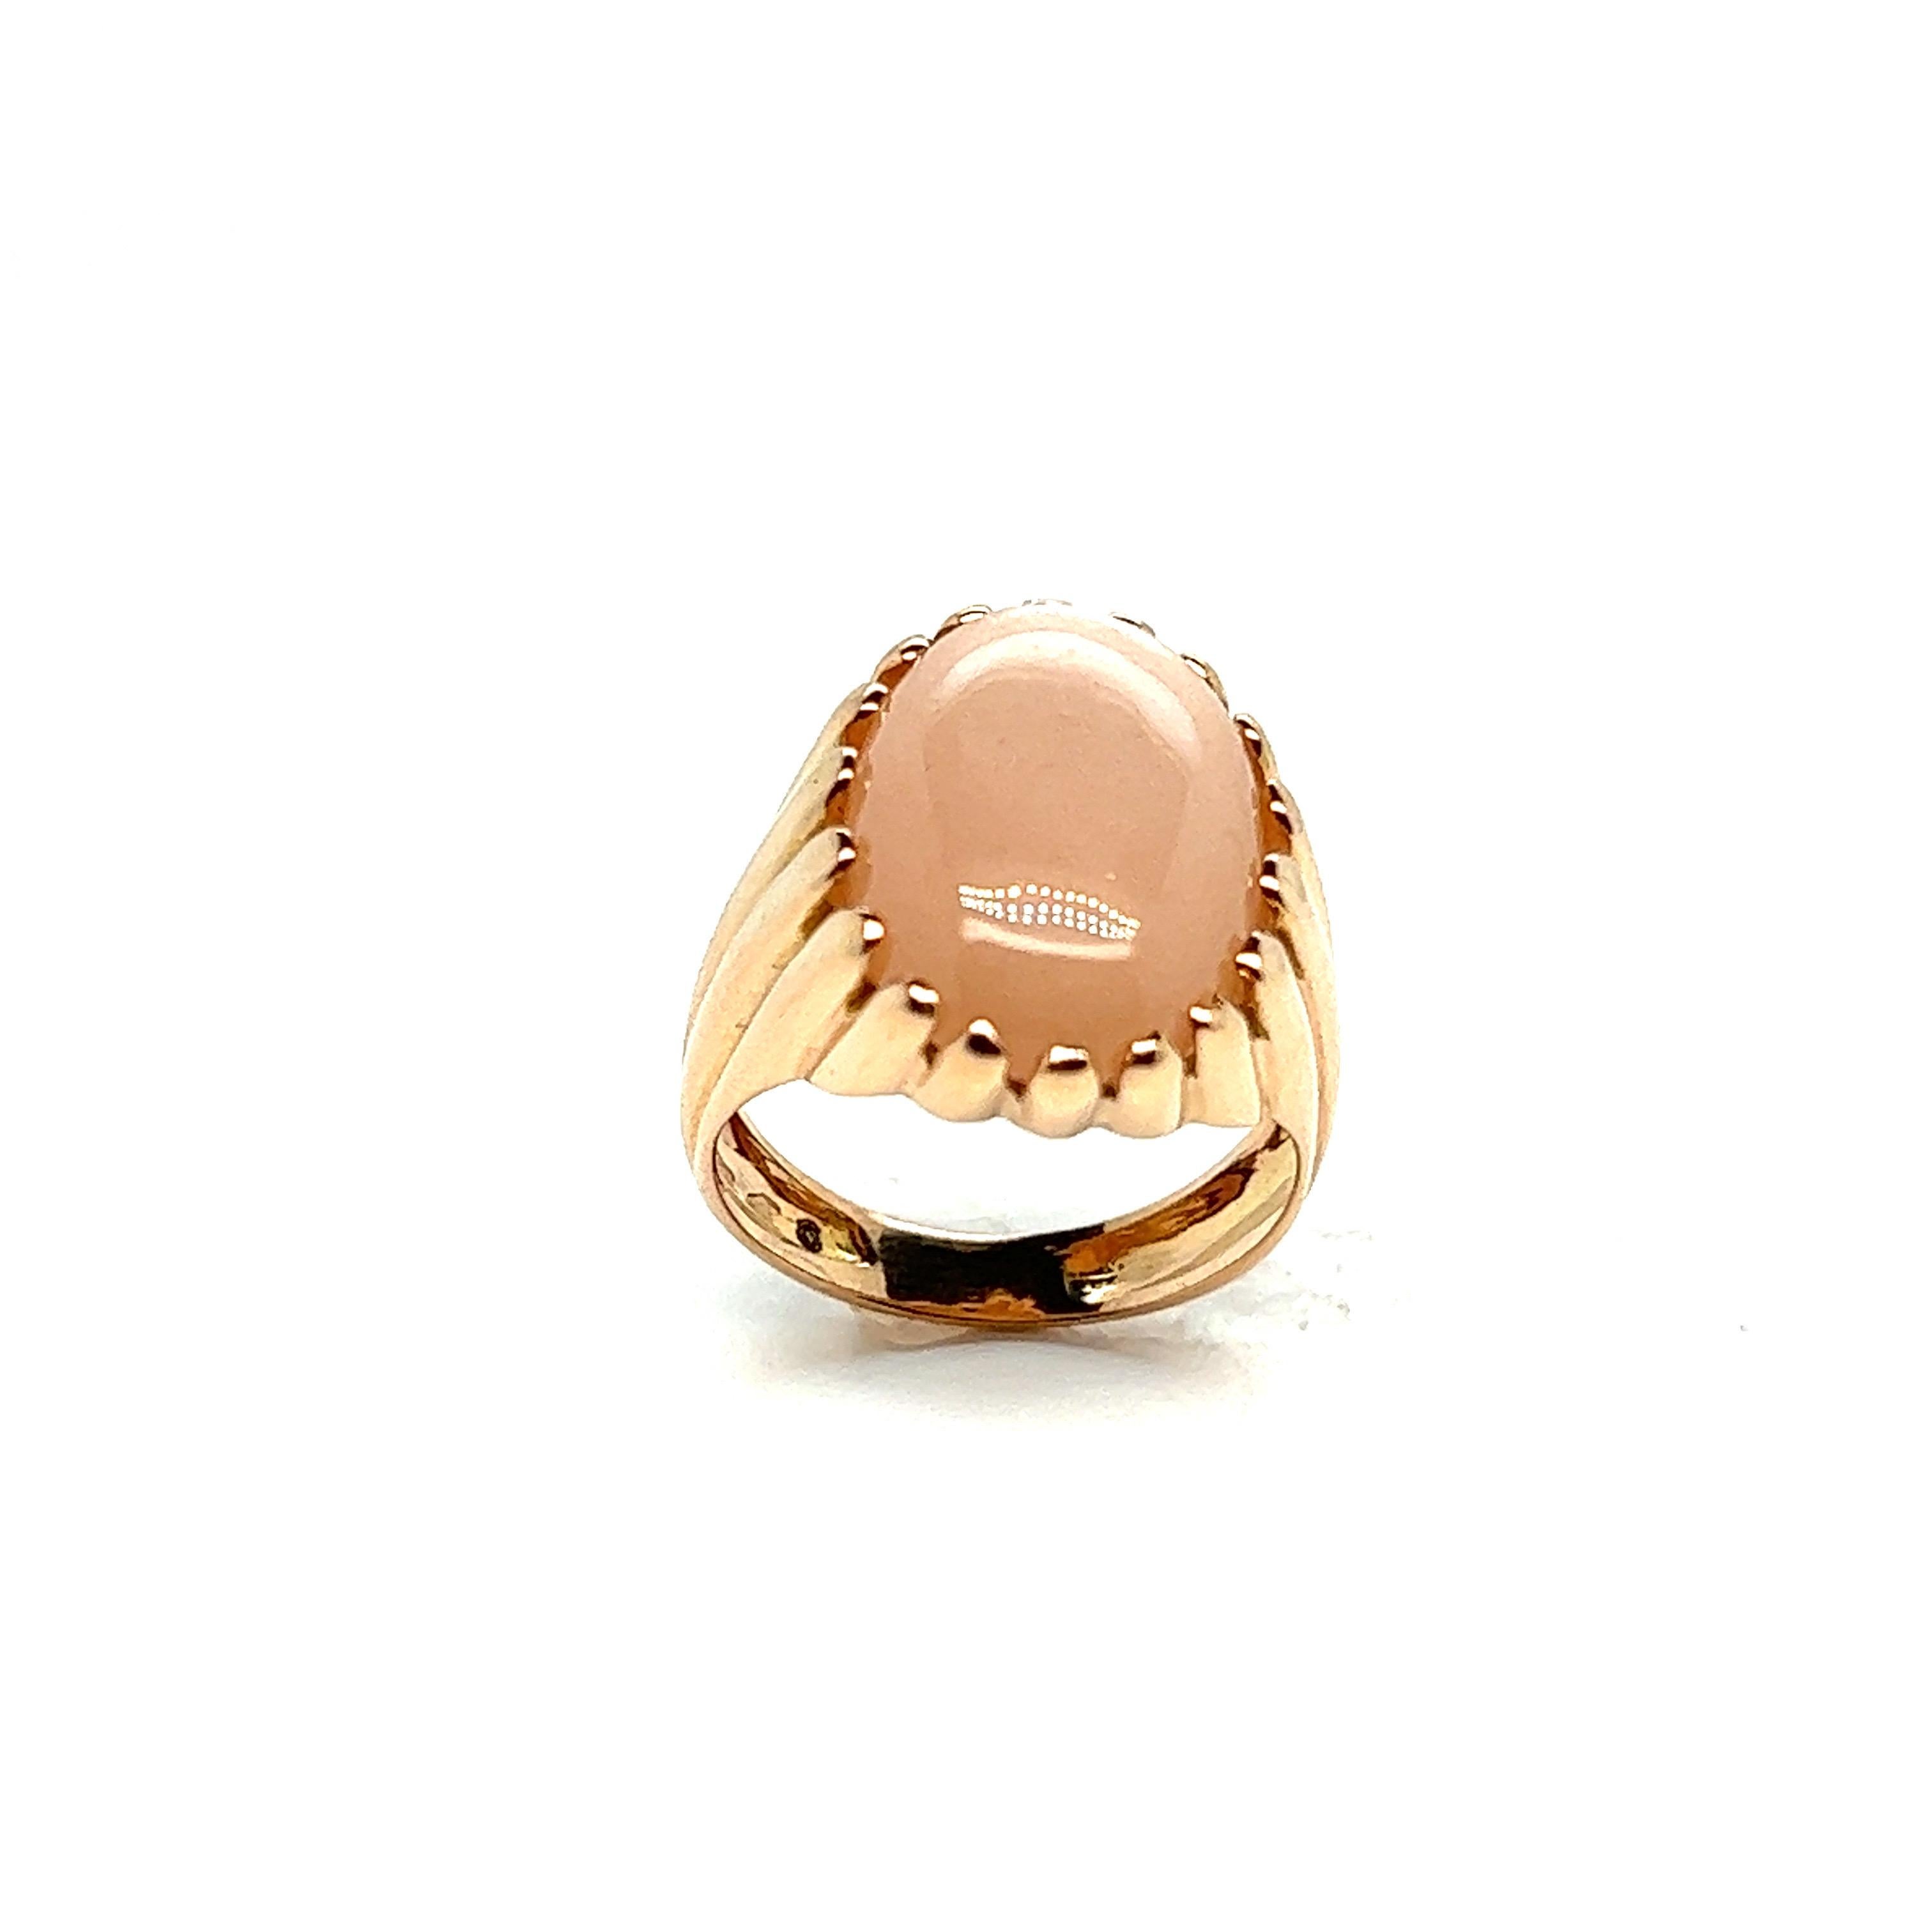 Discover this magnificent signet ring that embodies elegance and refinement. With its subtle fluted design, it offers a classic yet contemporary allure. Adorned with a sumptuous peach-pink moostone cabochon, measuring 15 mm x 20 mm, this ring is a